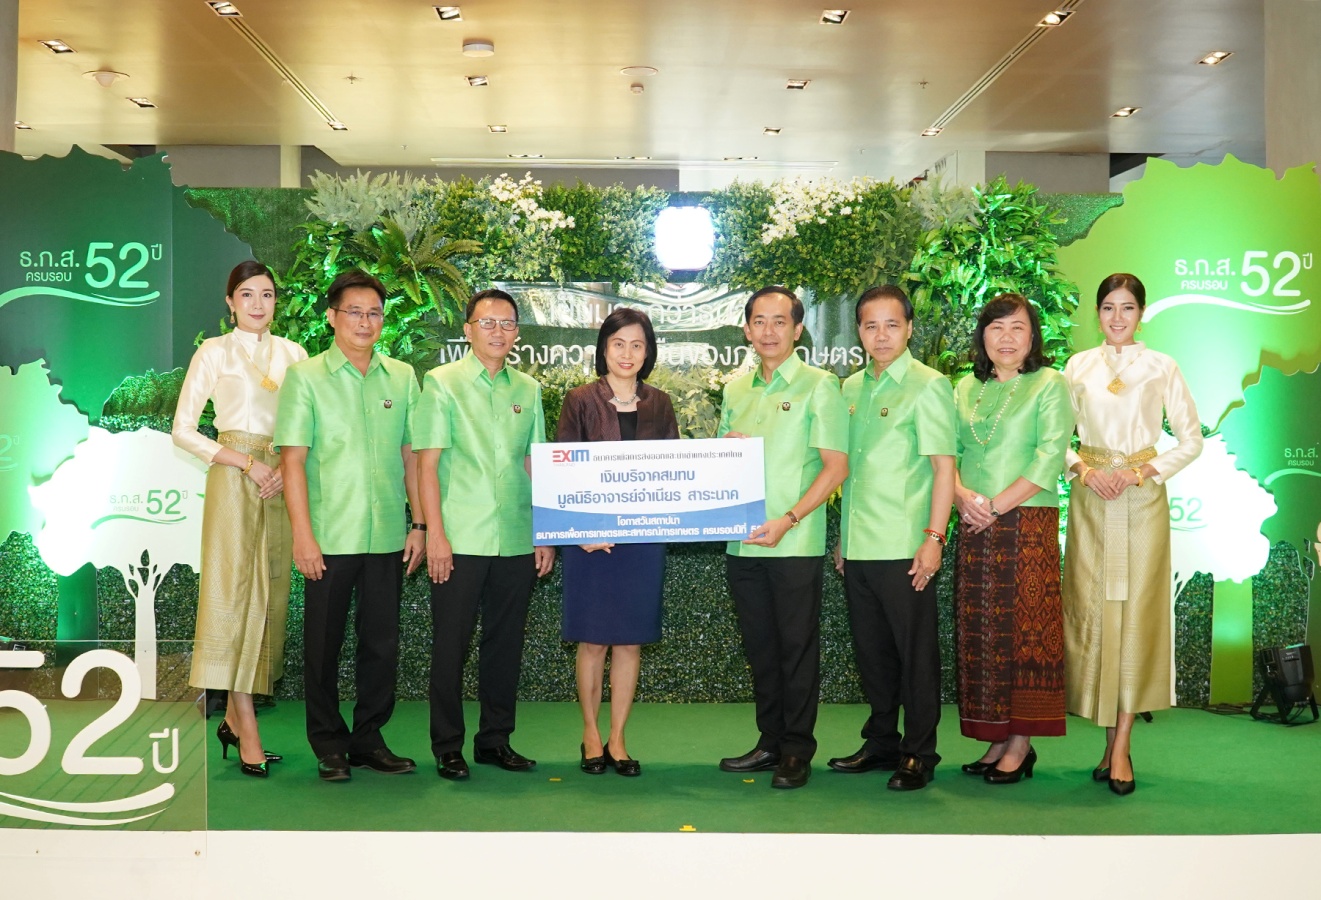 EXIM Thailand Congratulates 52nd Anniversary of Bank for Agriculture and Agricultural Cooperatives